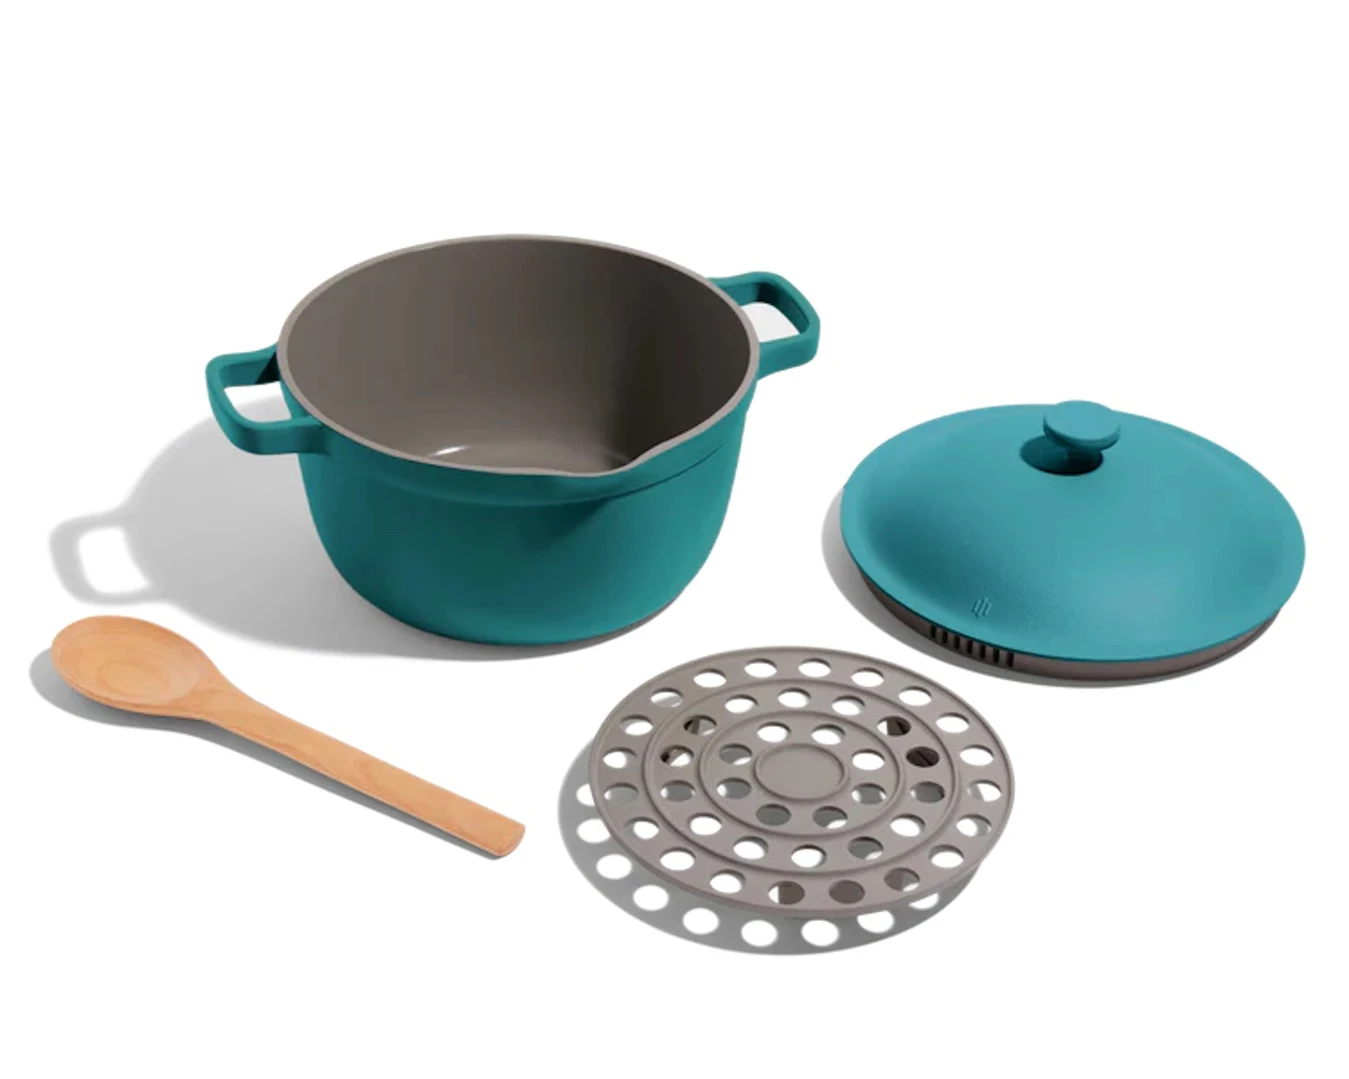 A ceramic dutch oven pot, lid, wooden spoon, and metal strainer sit out together.